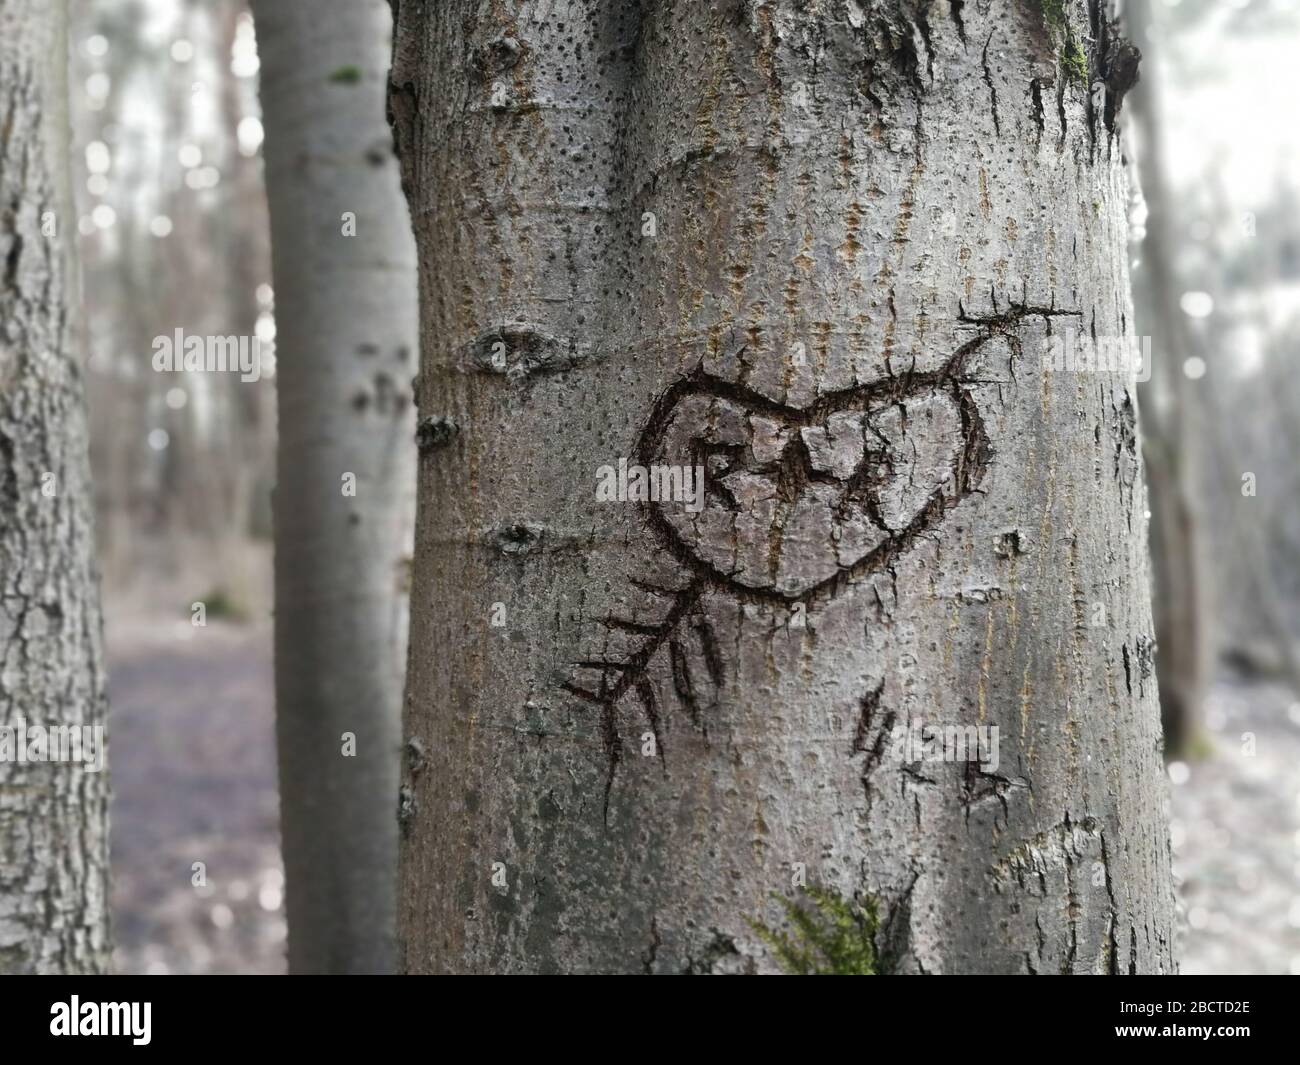 Heart shape with arrow engraved long time ago in the tree bark Stock Photo